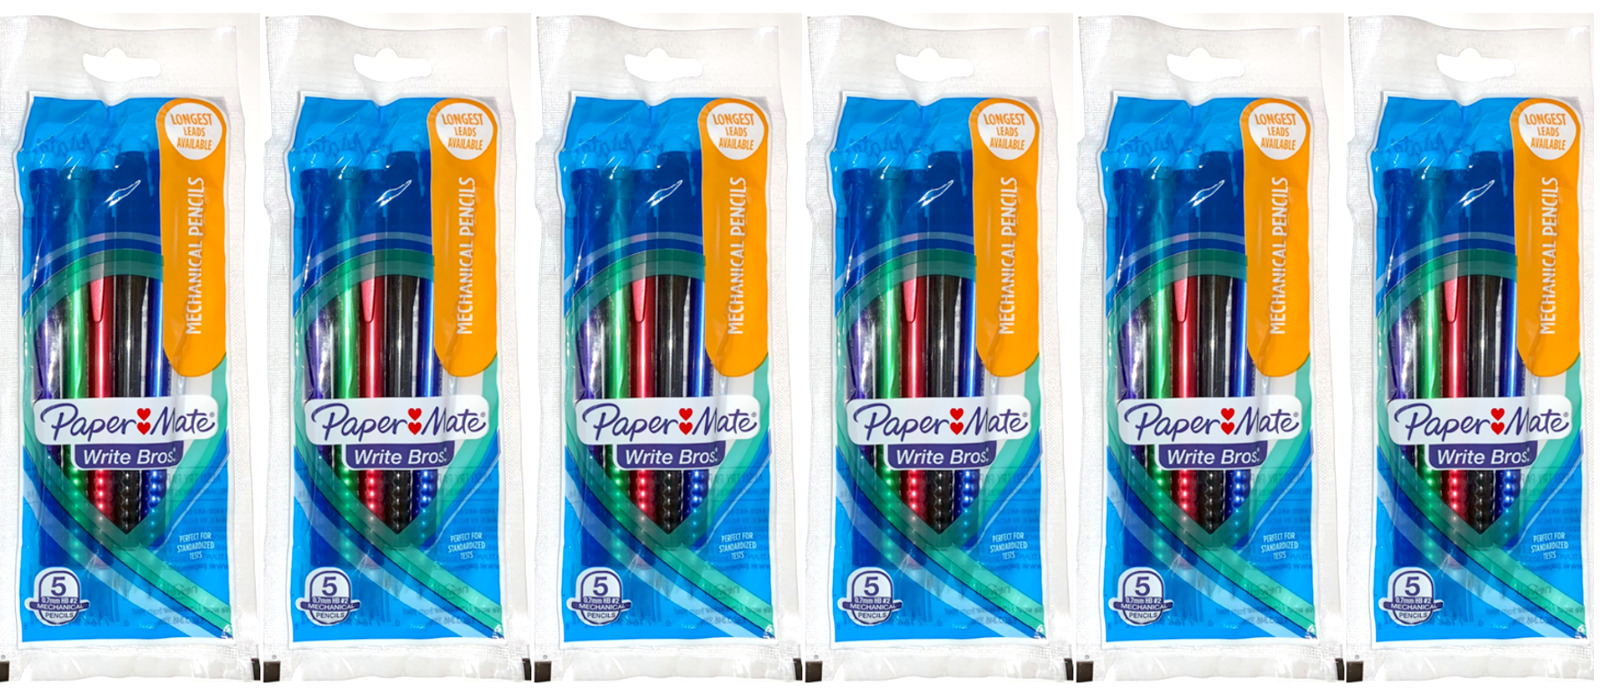 Paper Mate Write Bros. Mechanical Pencils 0.7mm HB #2, 5 each (Pack of 6 =30 CT)